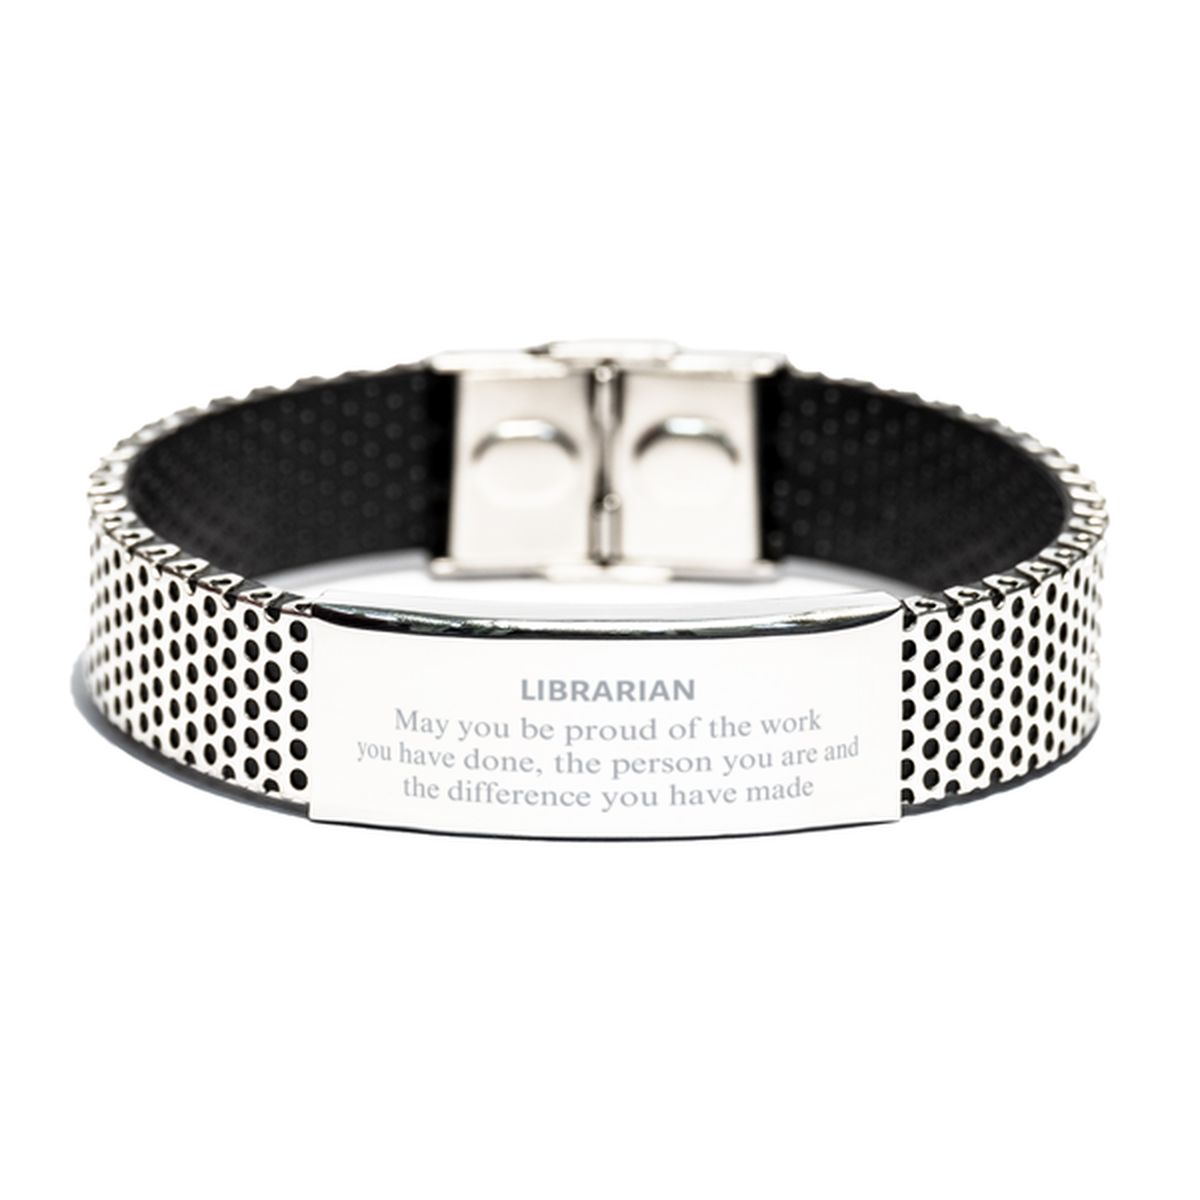 Librarian May you be proud of the work you have done, Retirement Librarian Stainless Steel Bracelet for Colleague Appreciation Gifts Amazing for Librarian